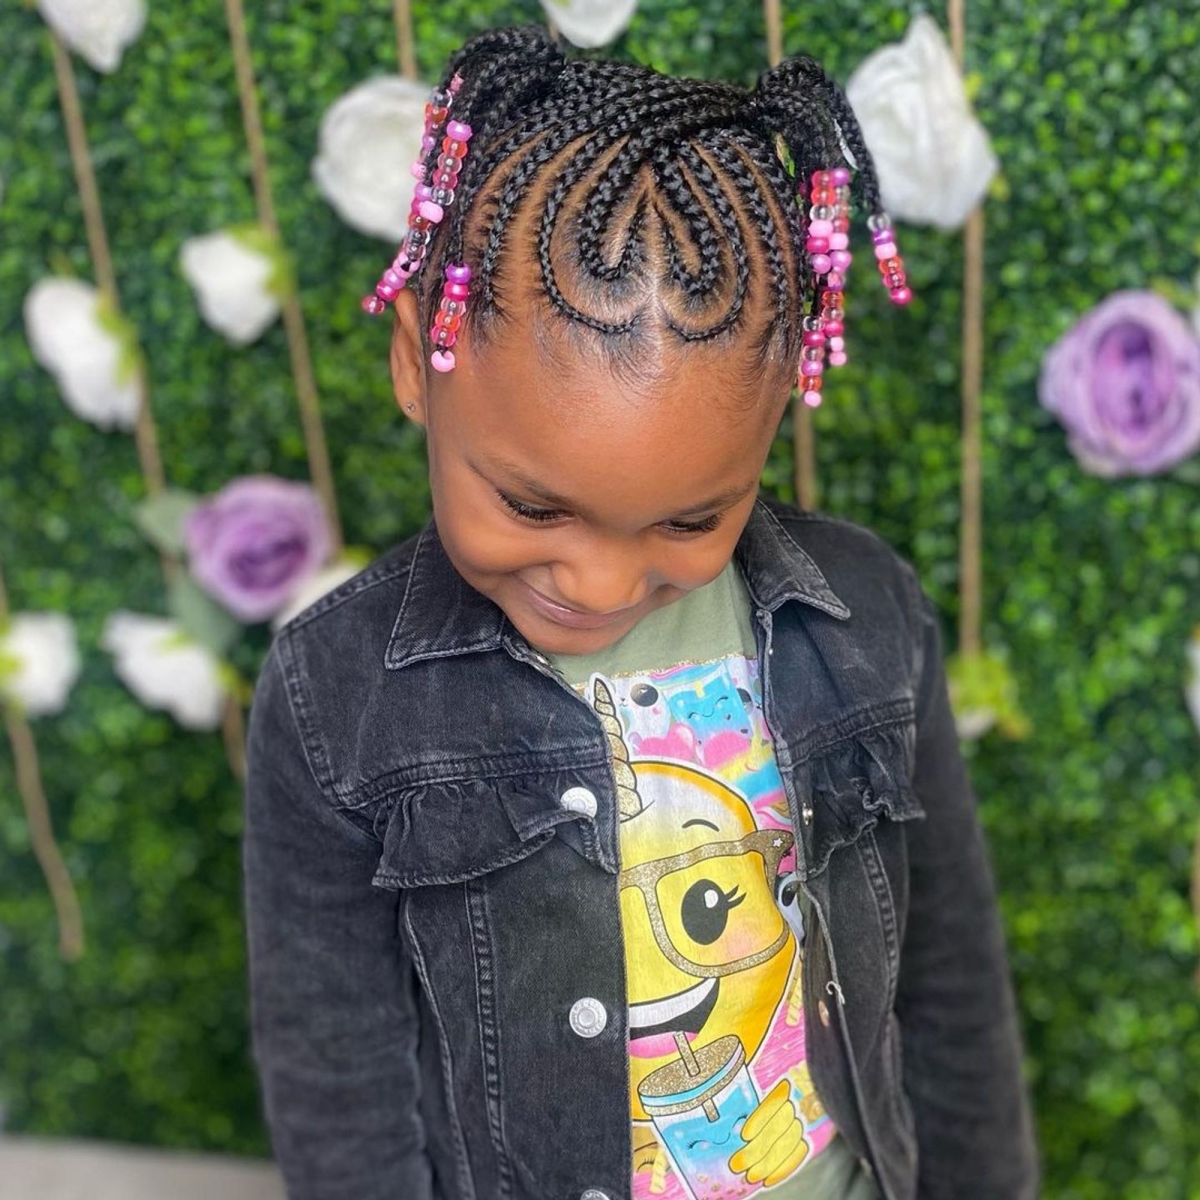 Explore A World Of Style: 7 Unique Hairstyles For Black Girls